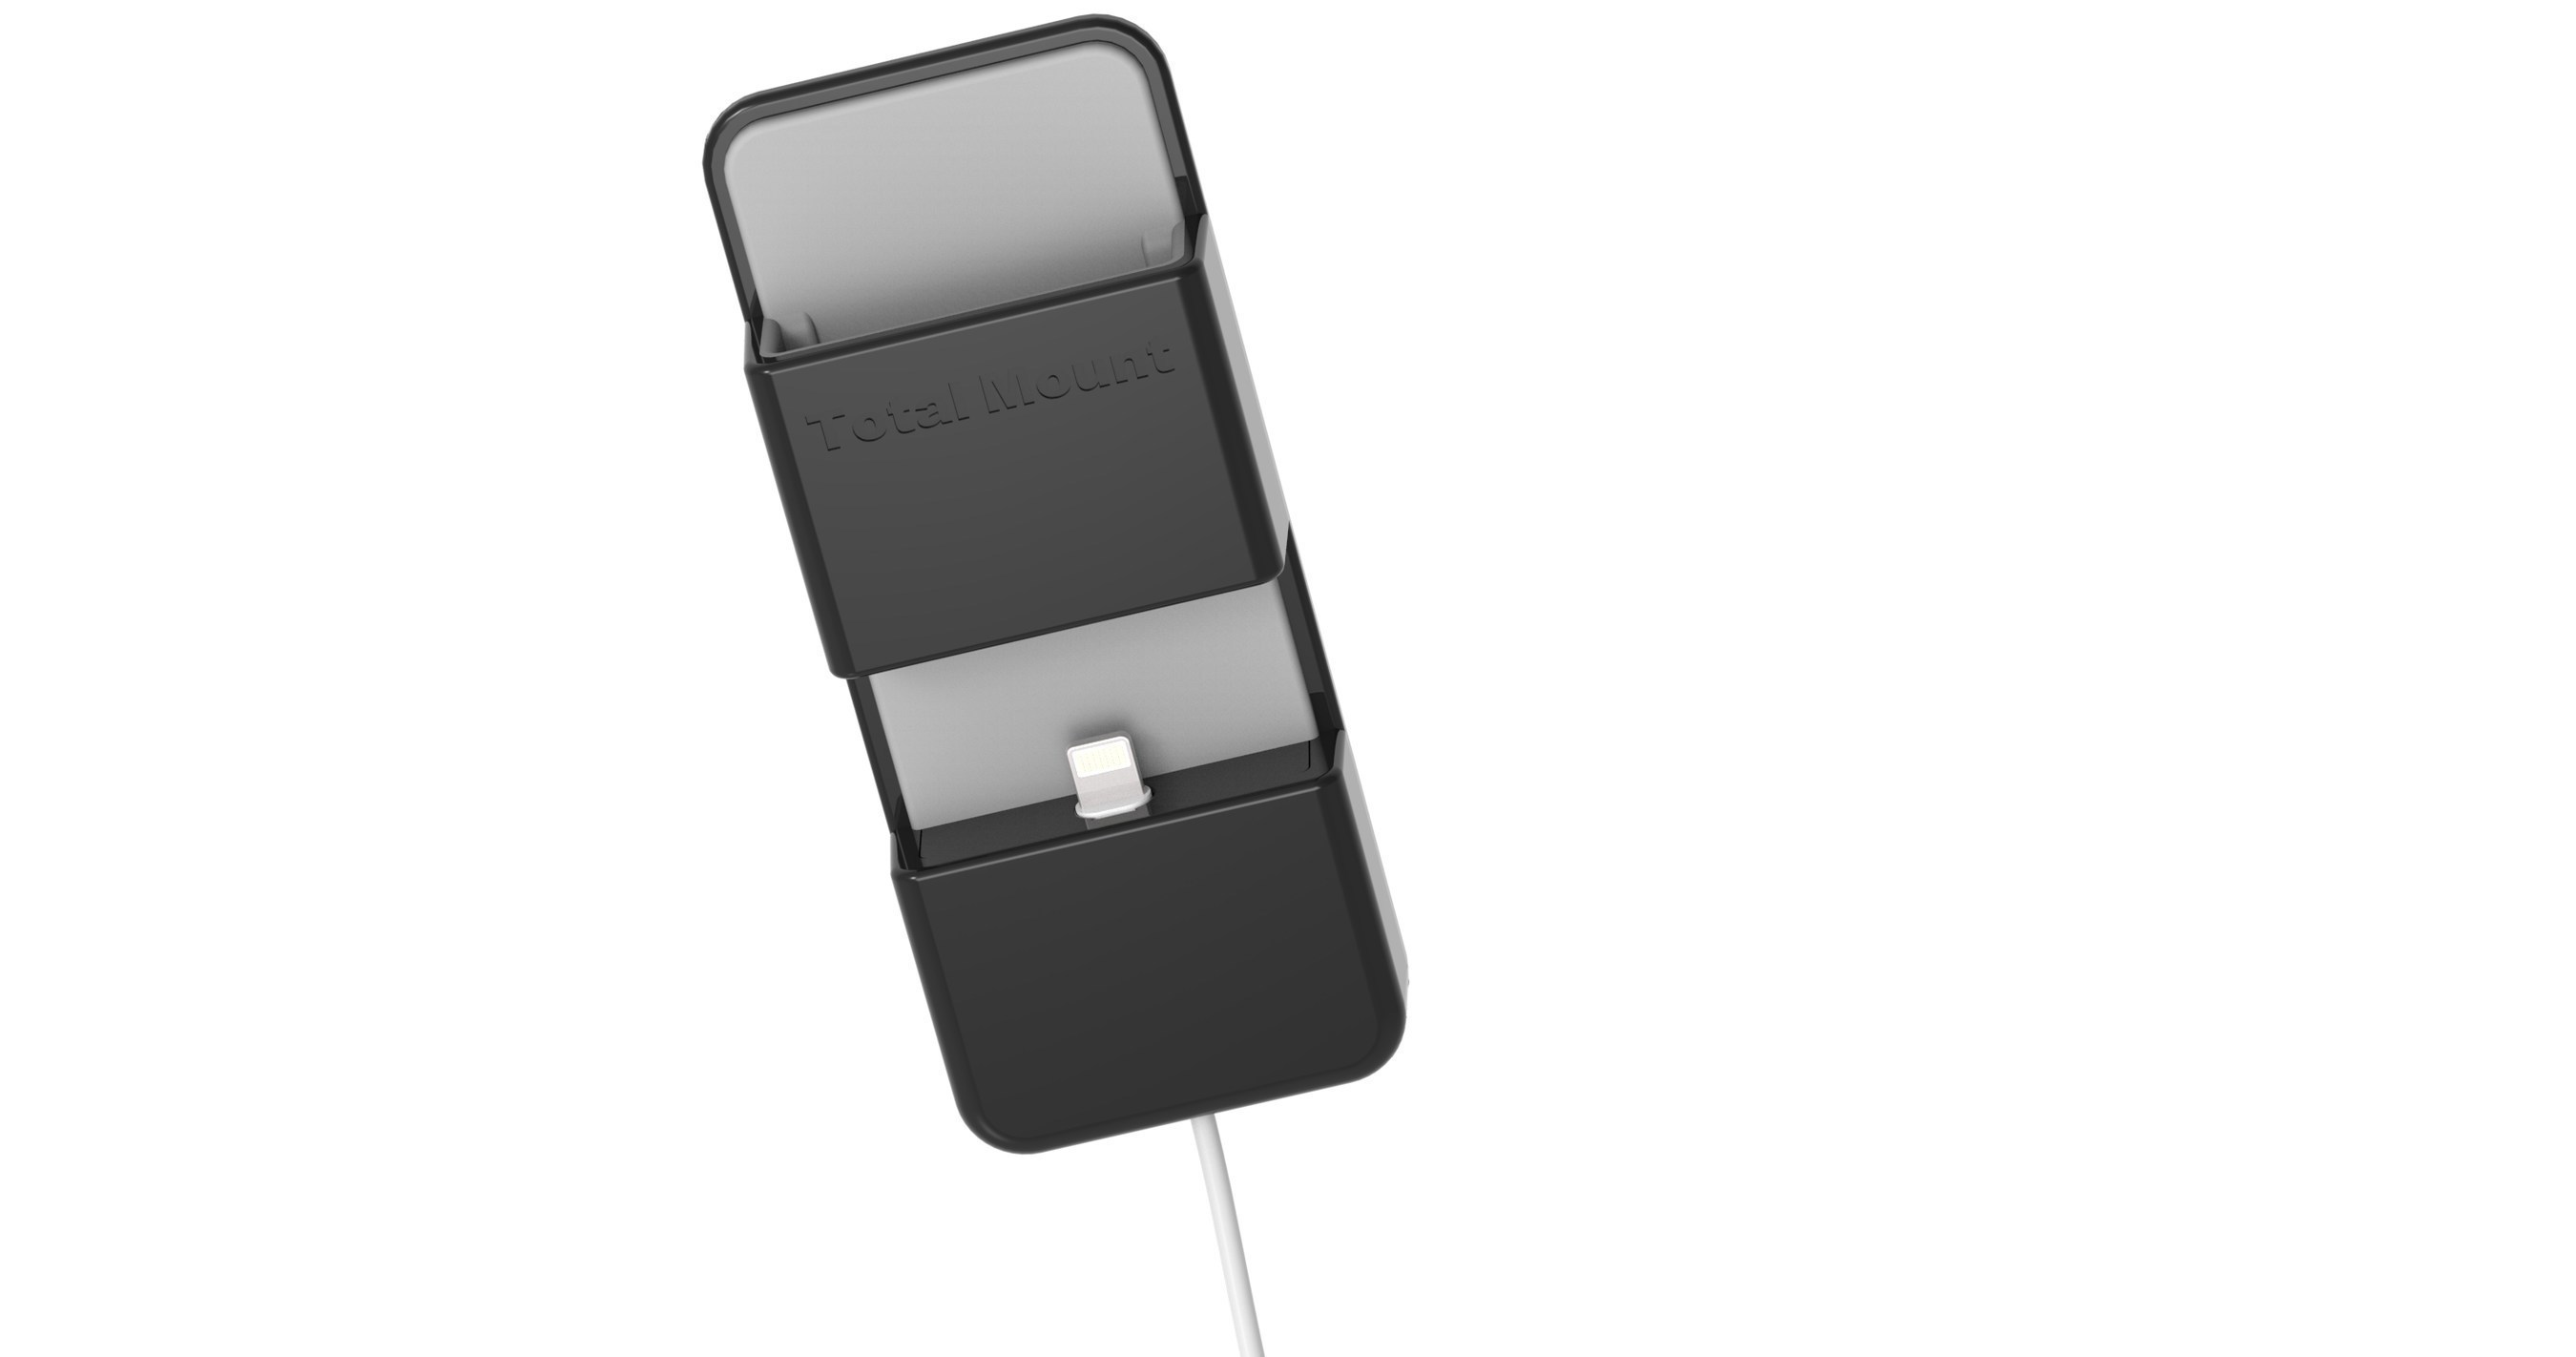 TotalMount Apple TV Remote Holder, which is included in the TotalMount Pro bundle sold in Apple stores worldwide.